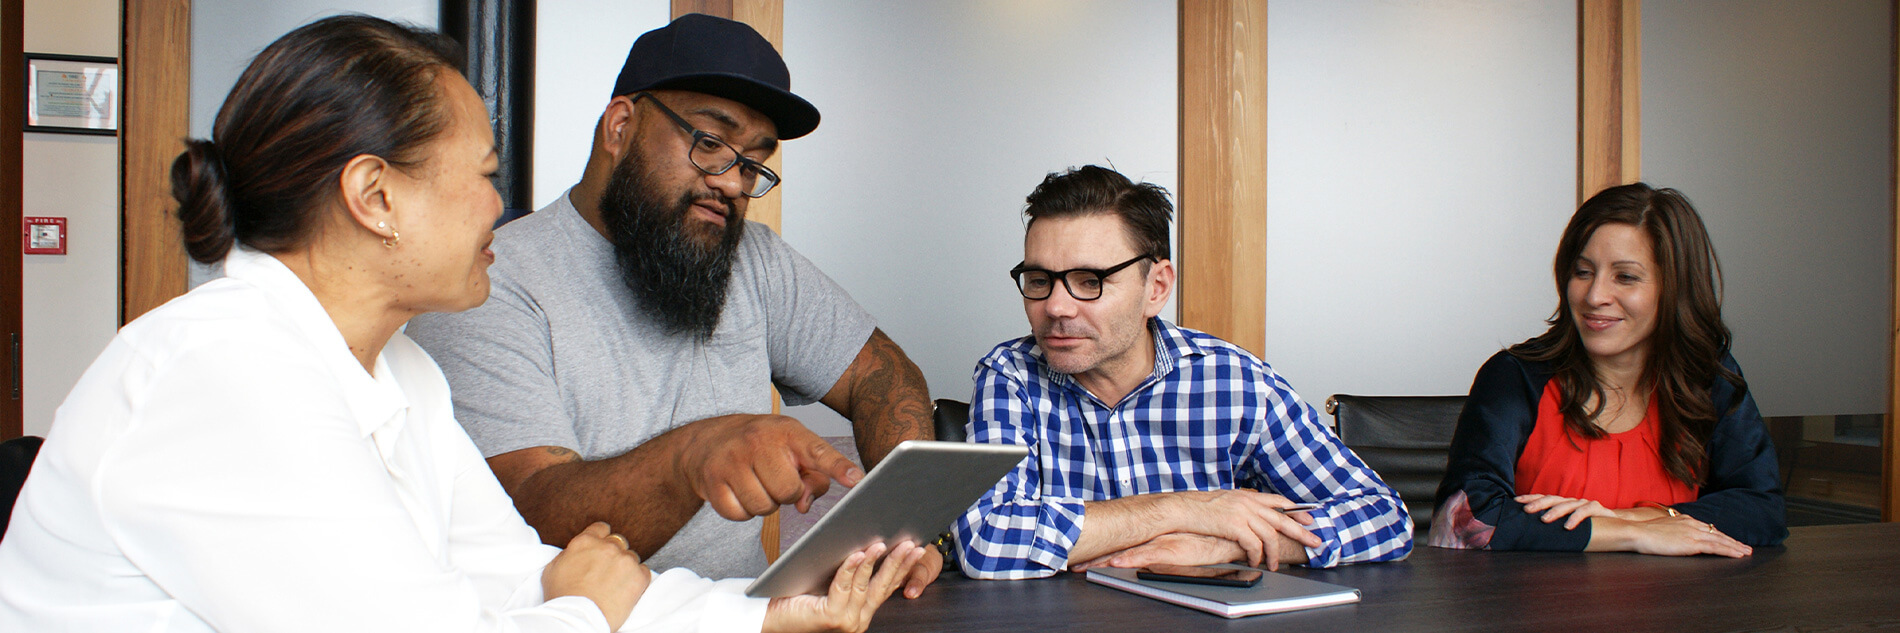 Two Boost developers working together on an Agile development project.